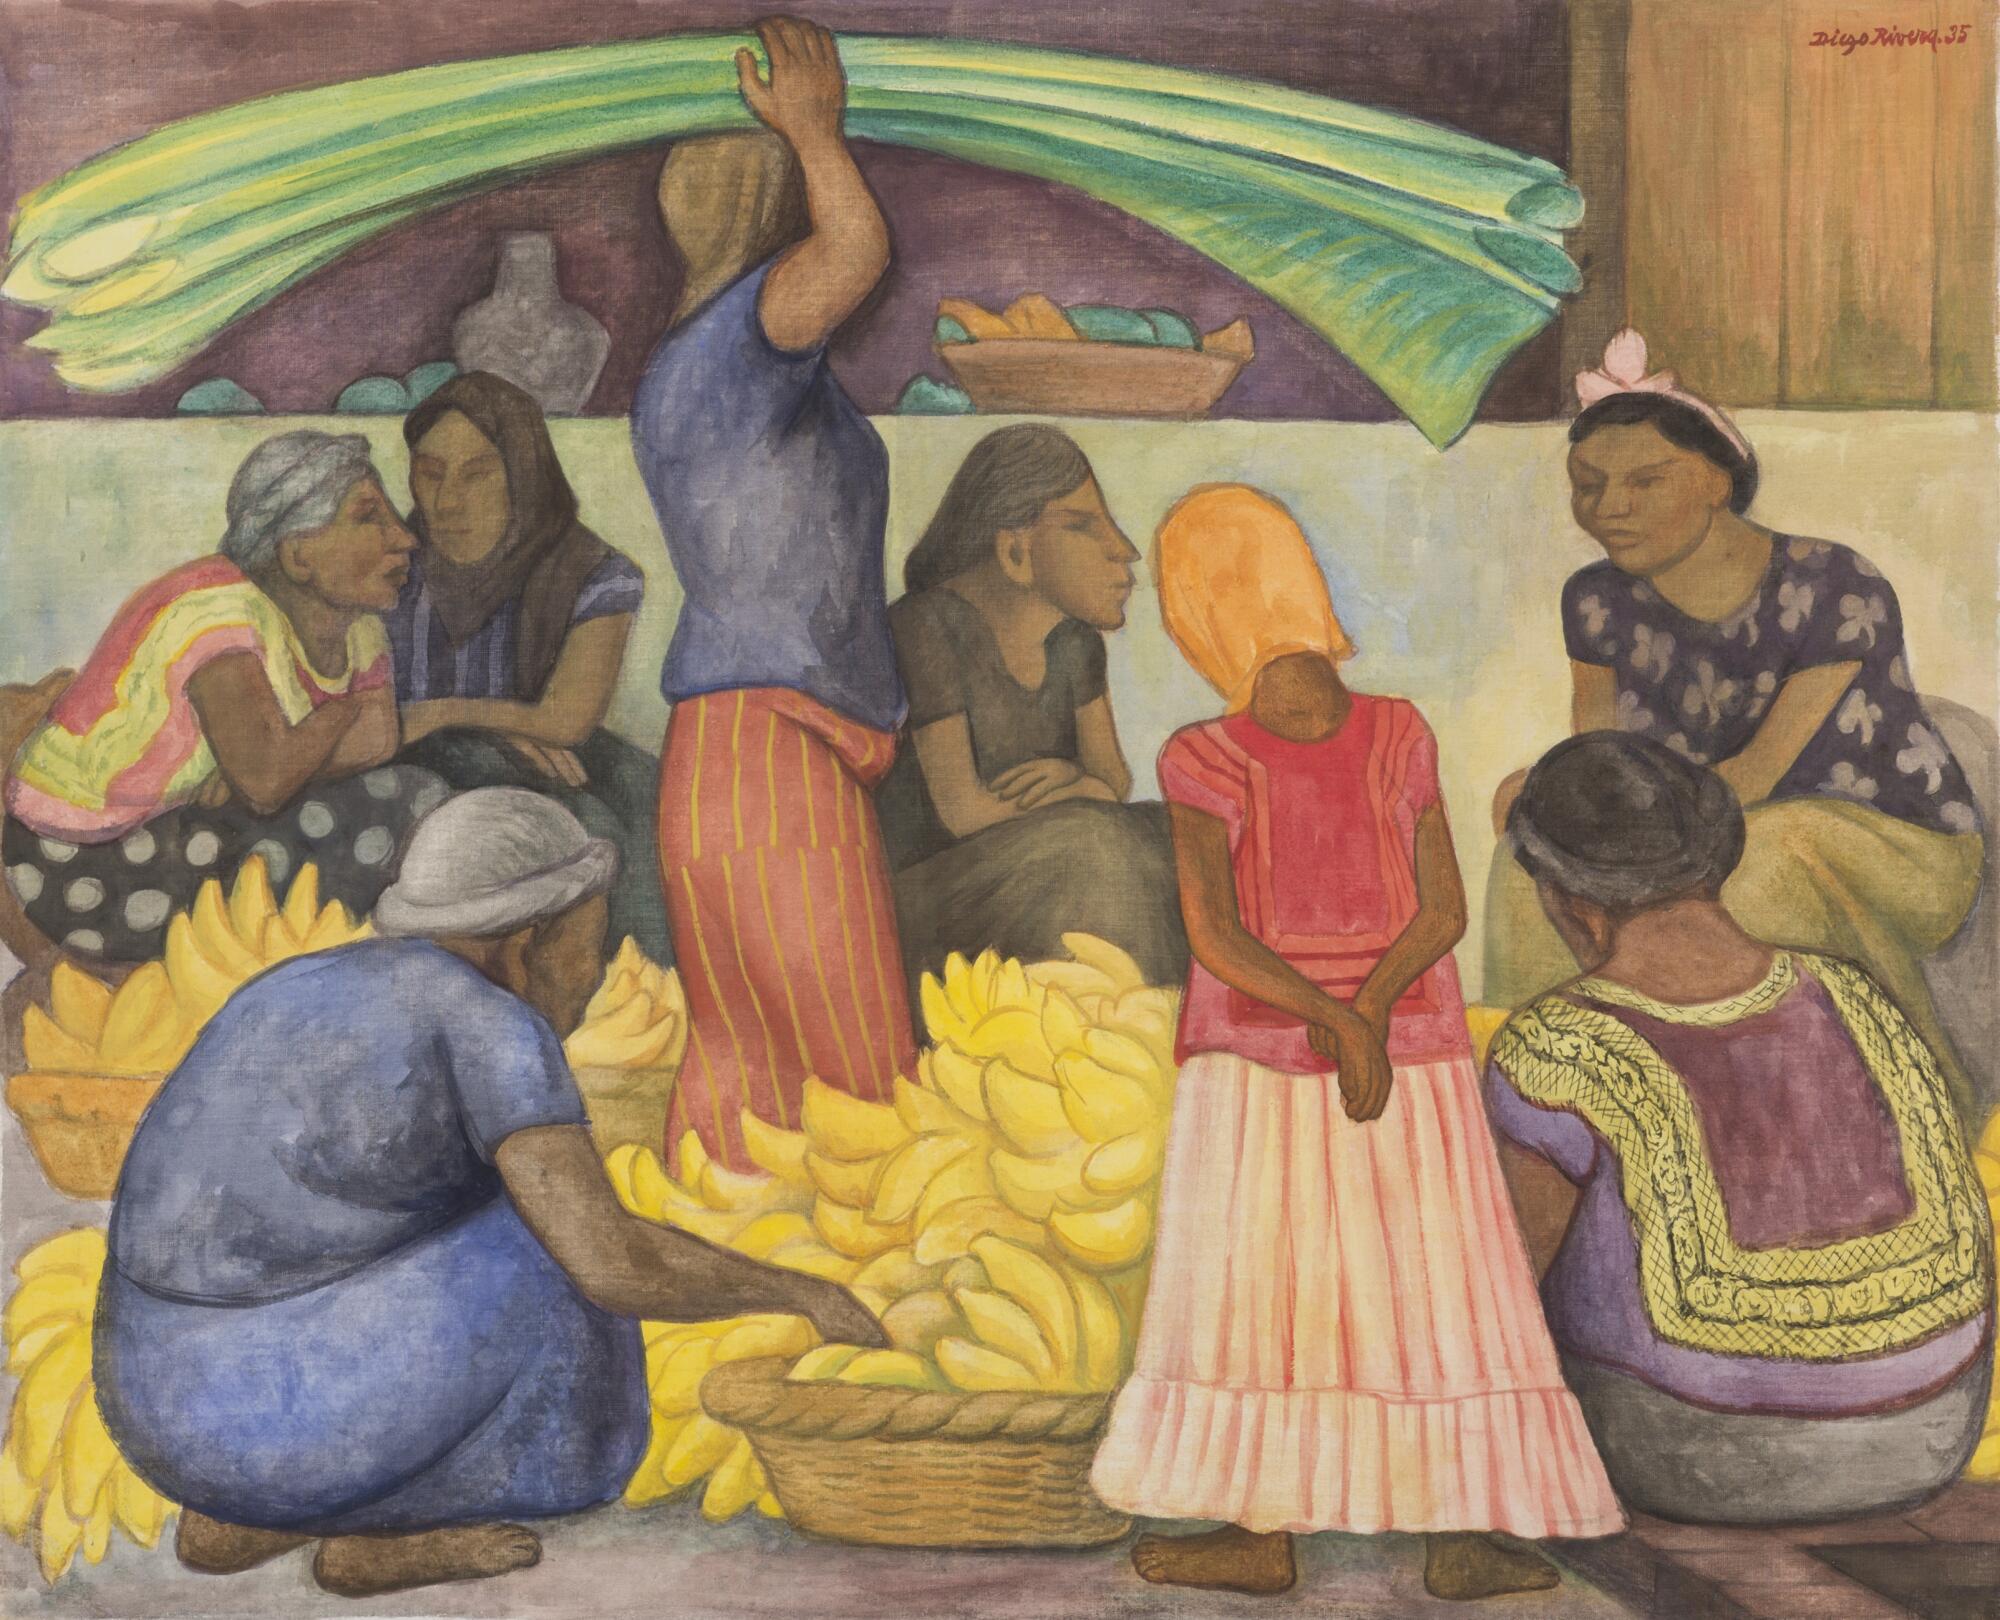 A painting by Diego Rivera shows a group of Indigenous women, some seated, plying bananas and other fruit at a market